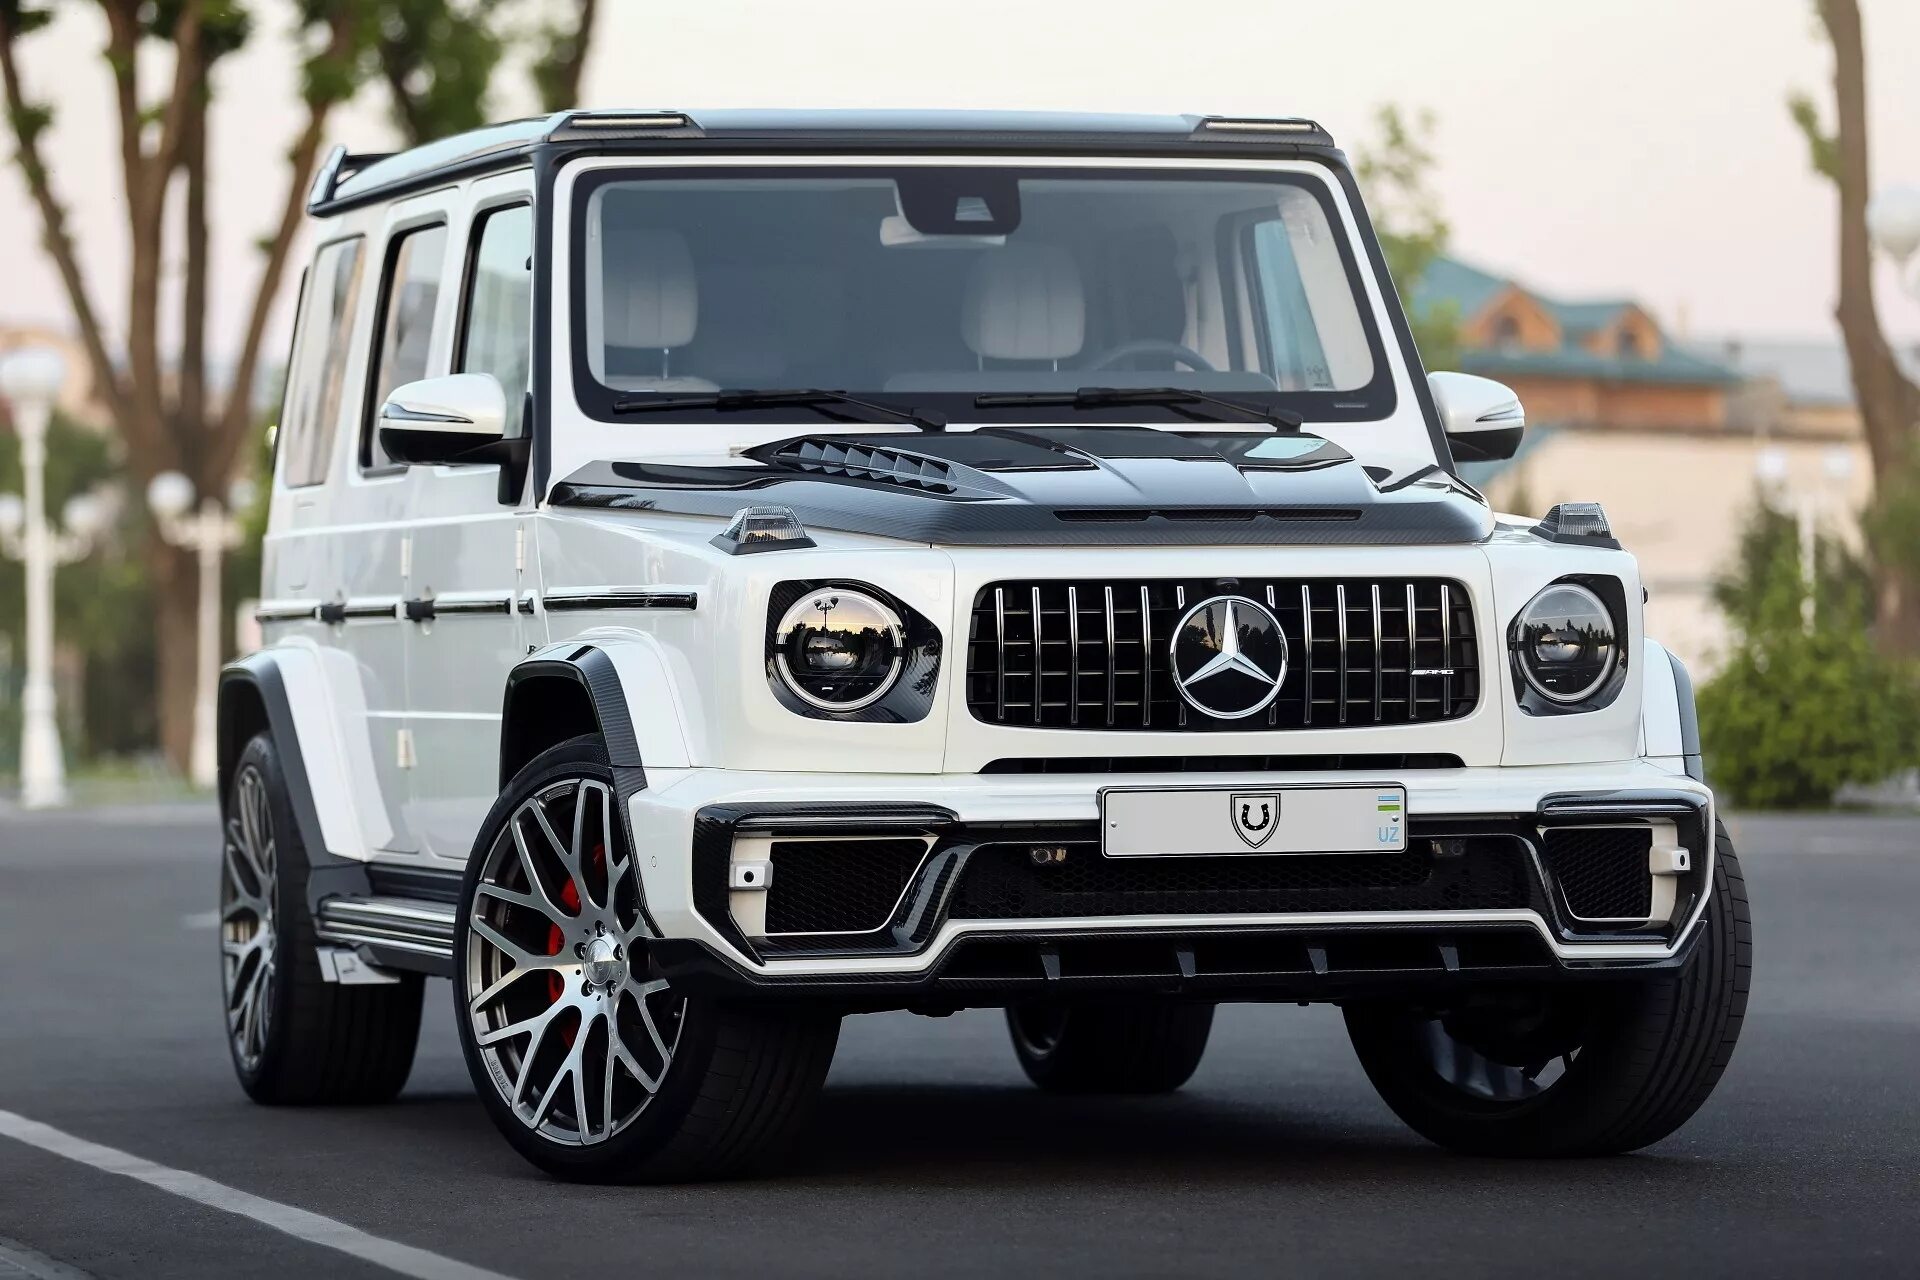 Mercedes g 2024. Mercedes Benz g63 AMG. Мерседес Гелендваген 63 AMG. Mercedes g63 PNG. Мерседес Гелендваген g63 AMG.